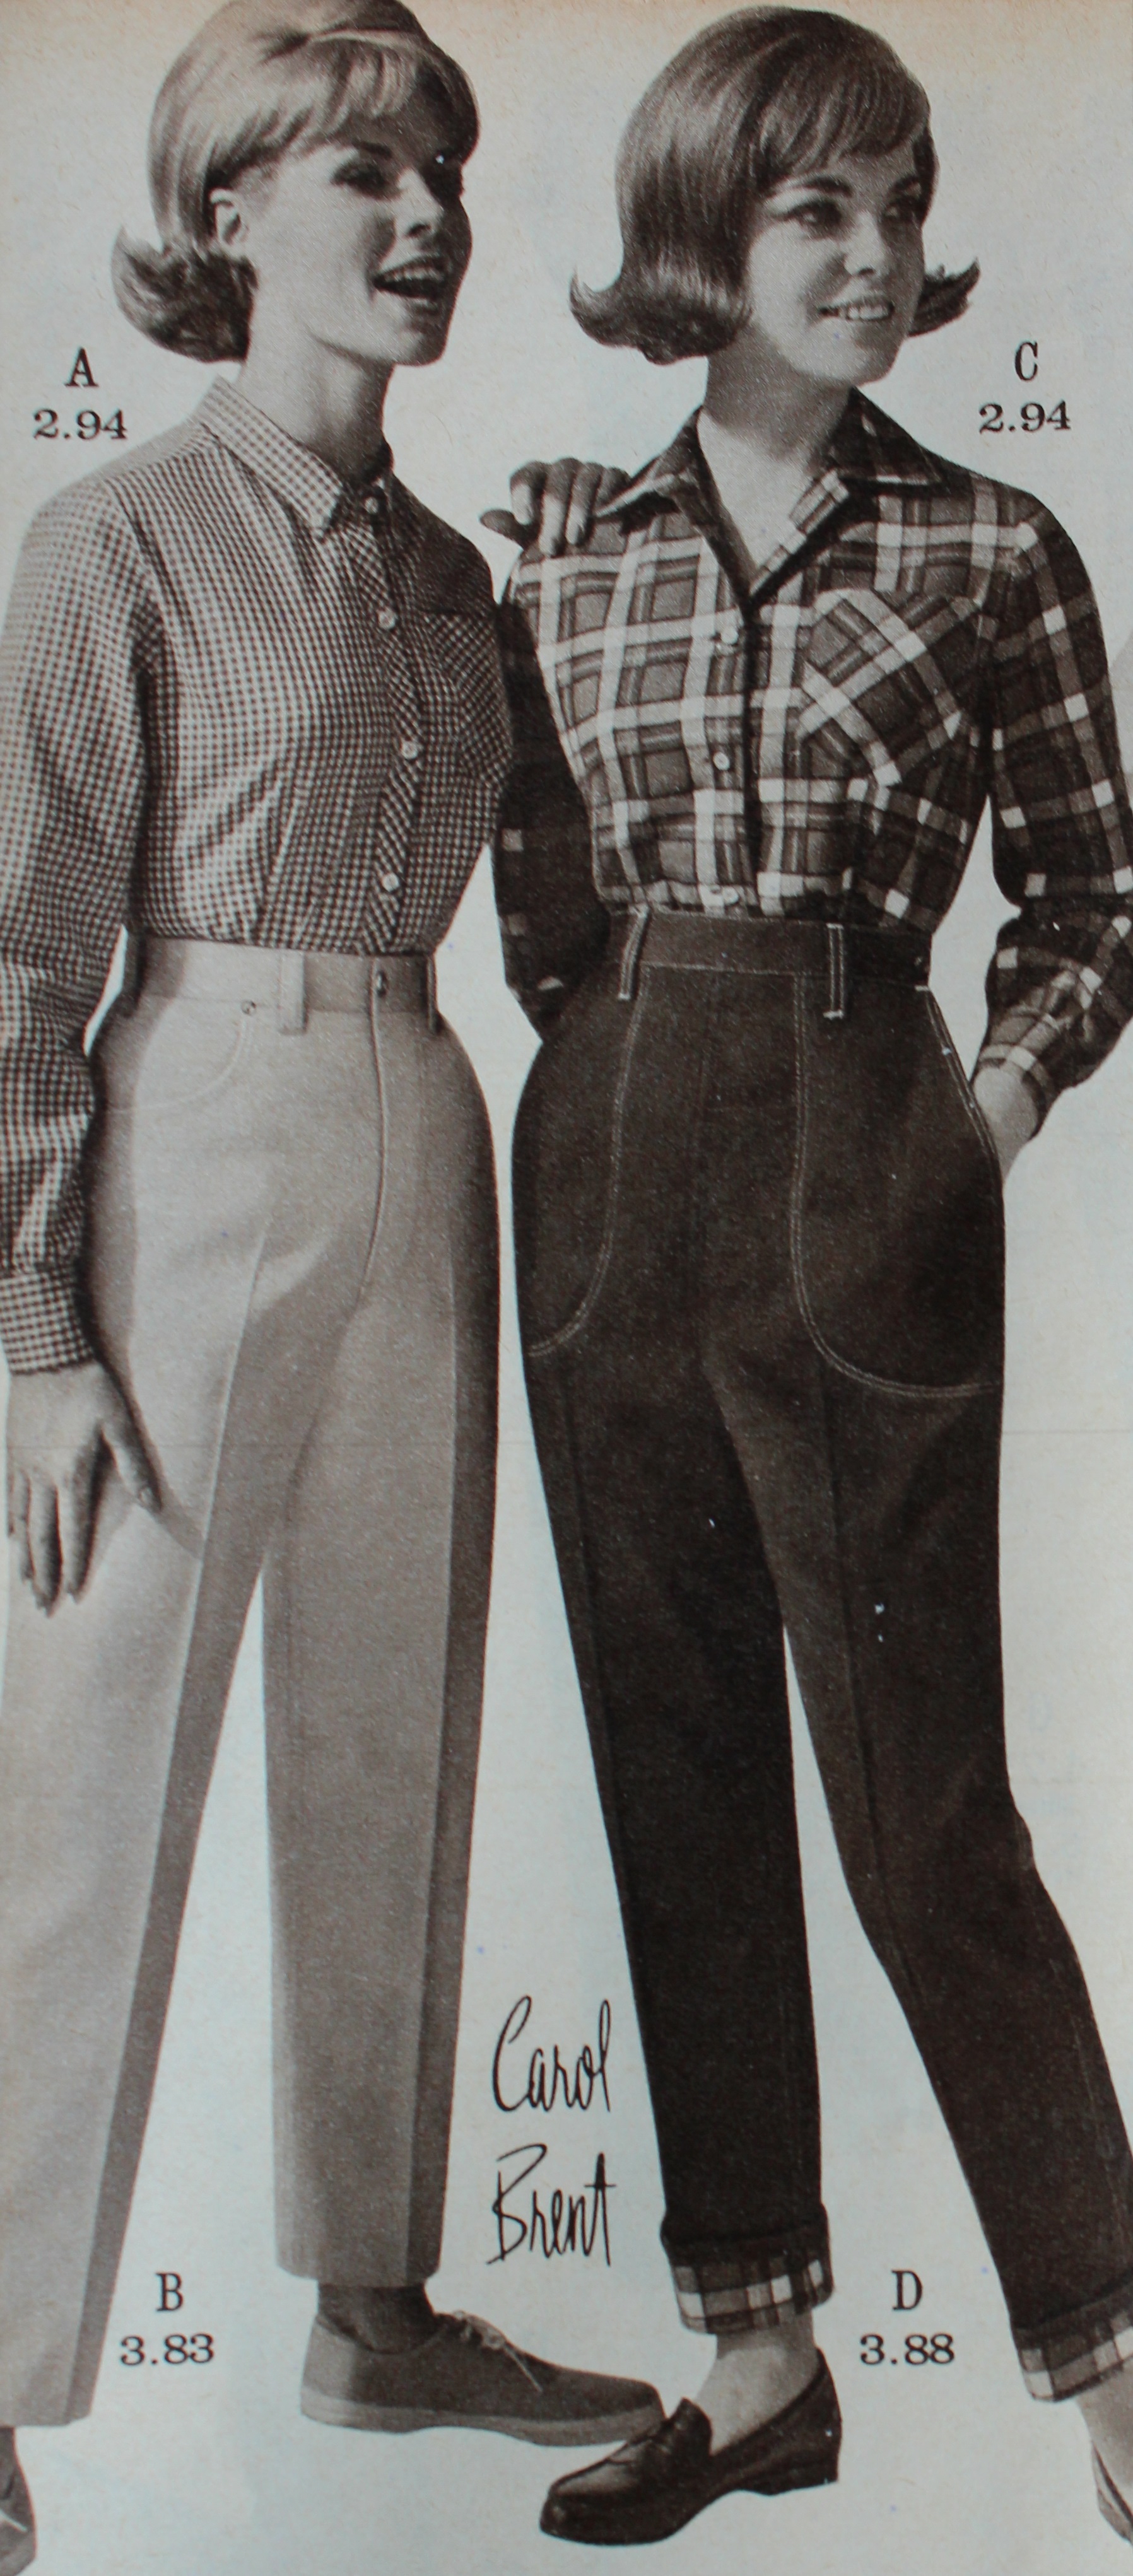 Vintage Jeans 1930s-1970s History for Women